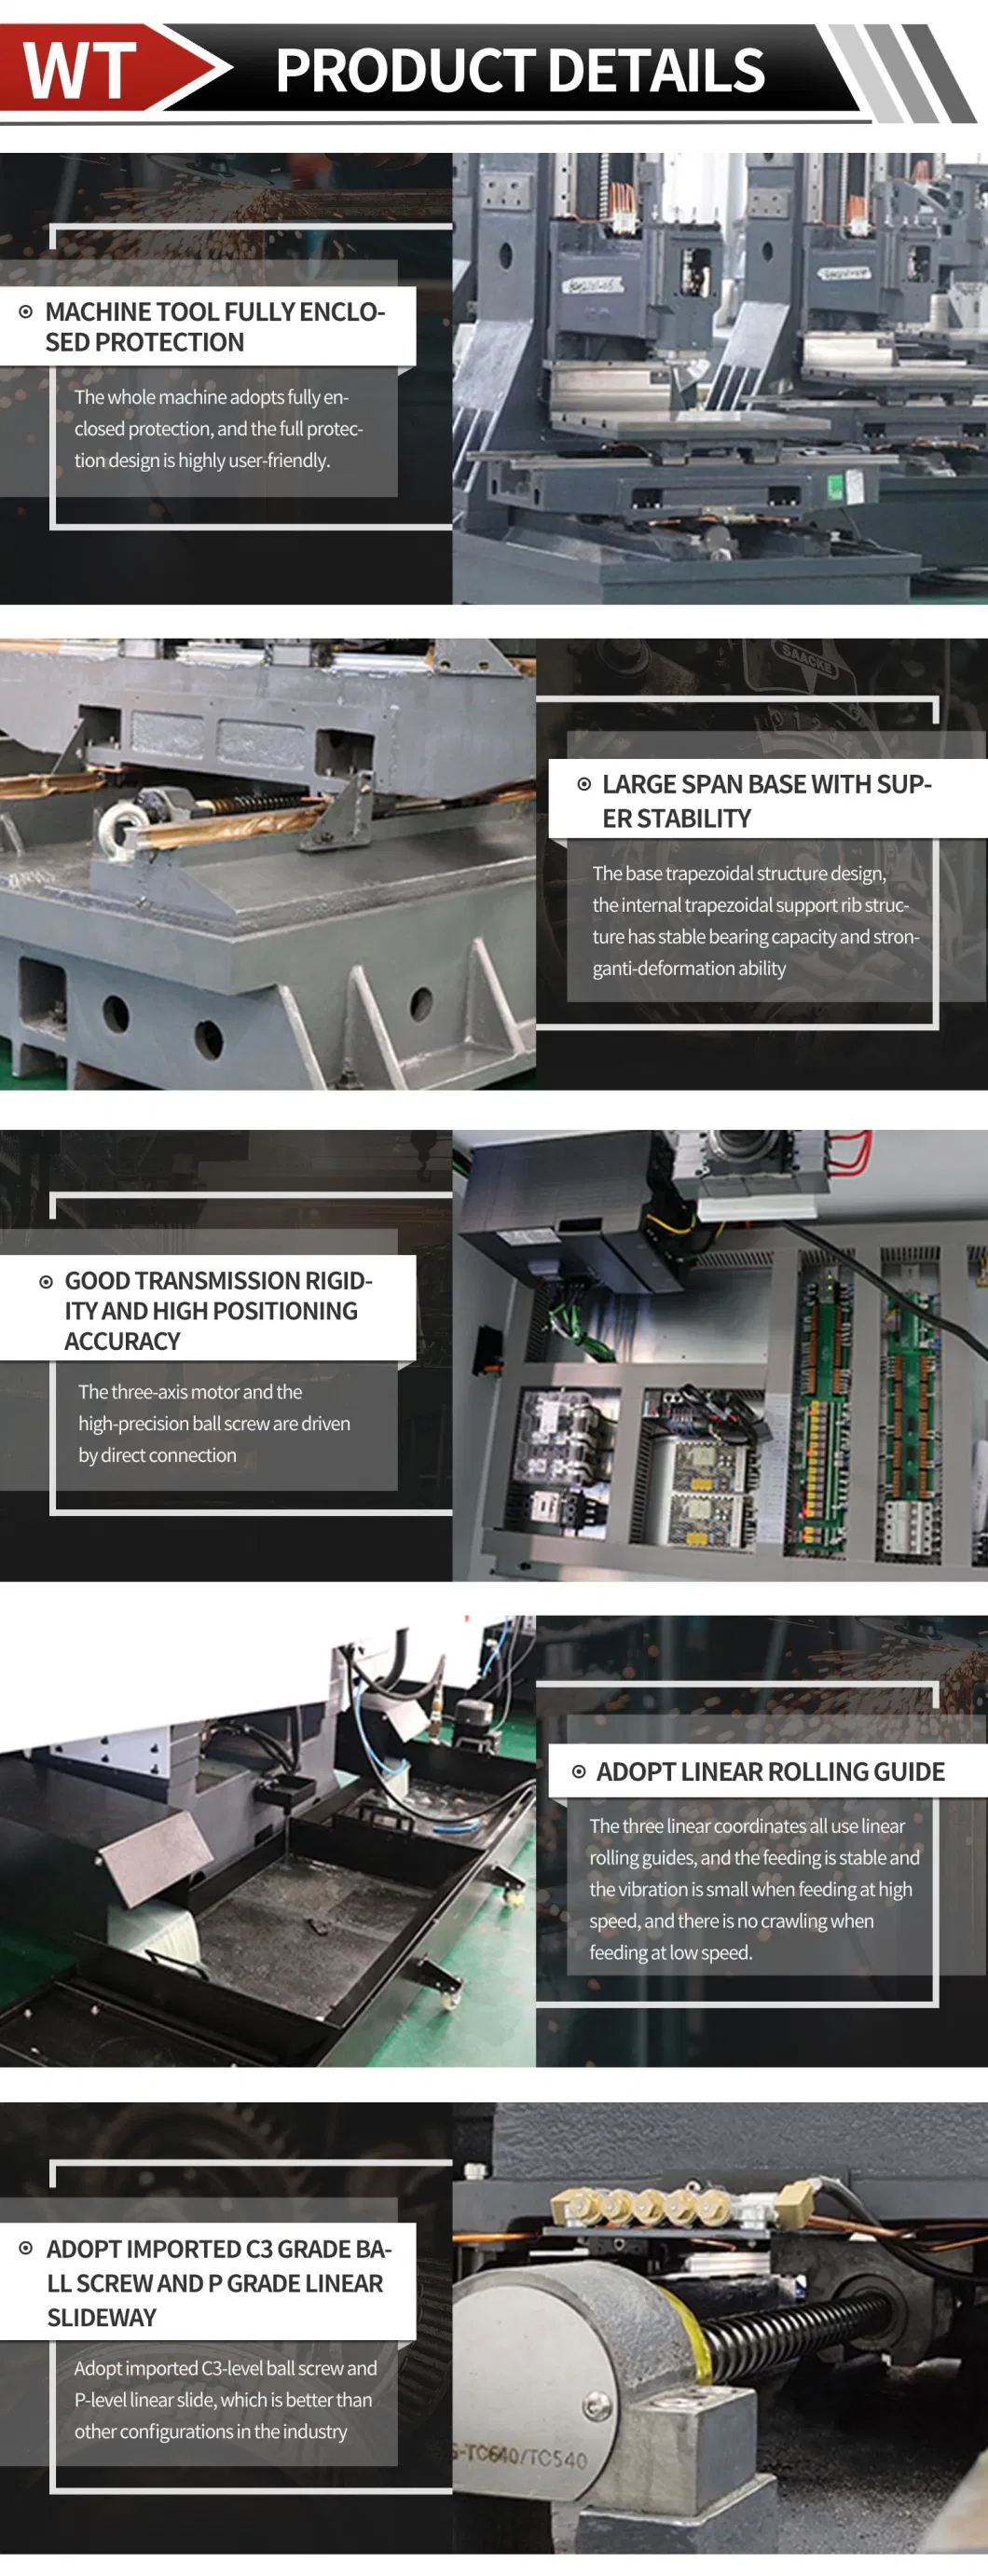 3 Axis Hard Rail Guideway CNC Milling Drilling Vmc Machine Tools for Metal Mould Processing